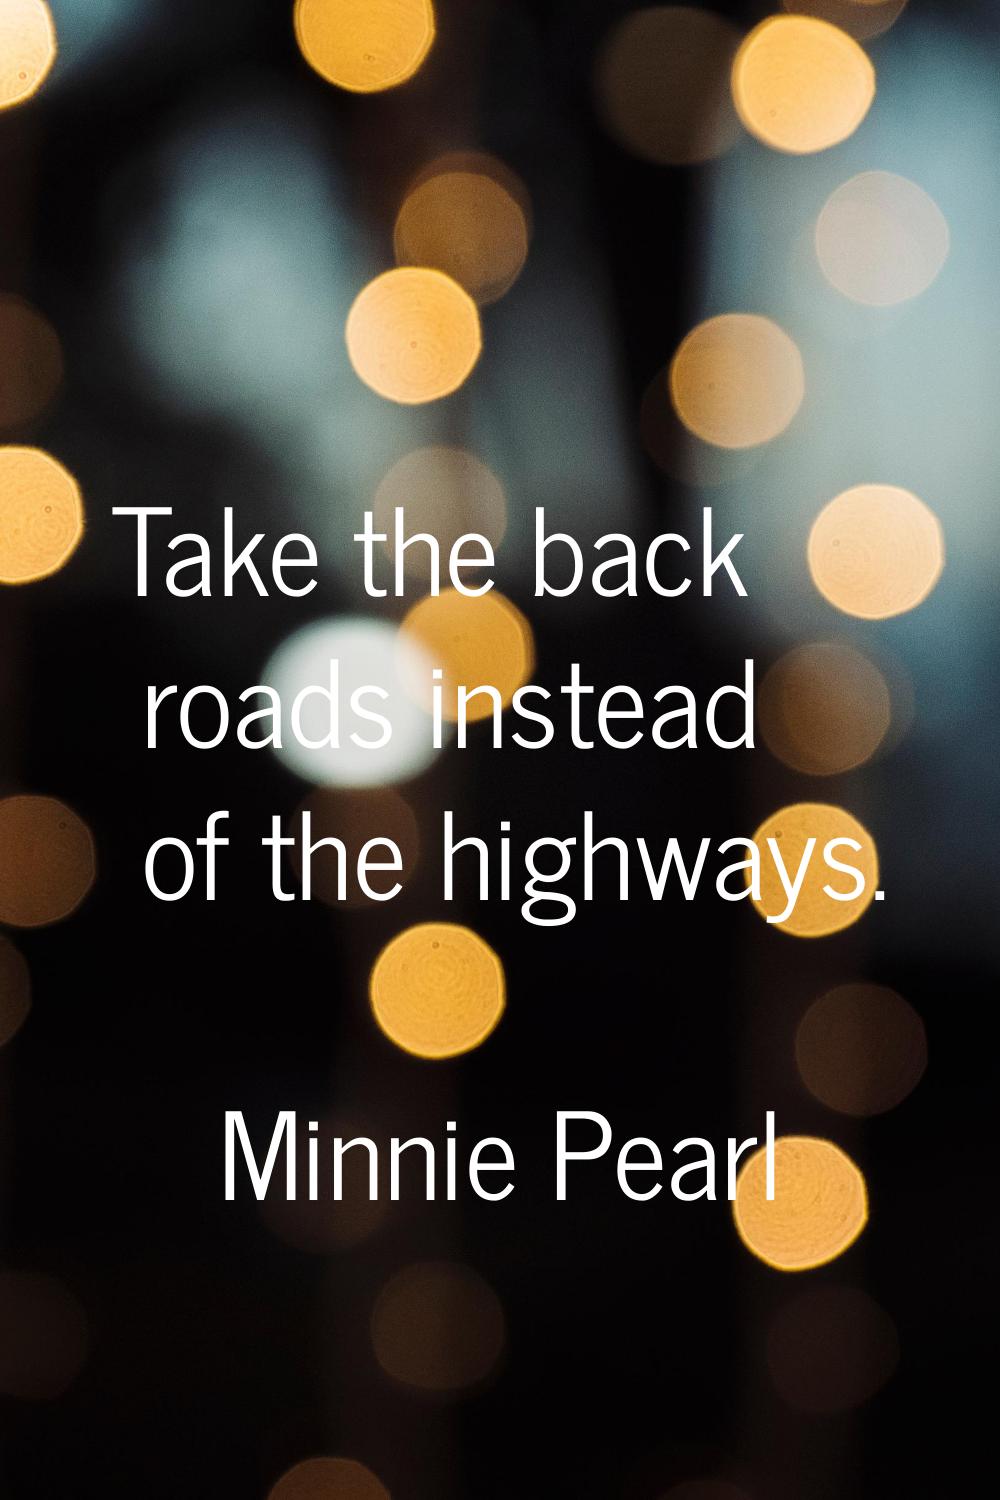 Take the back roads instead of the highways.